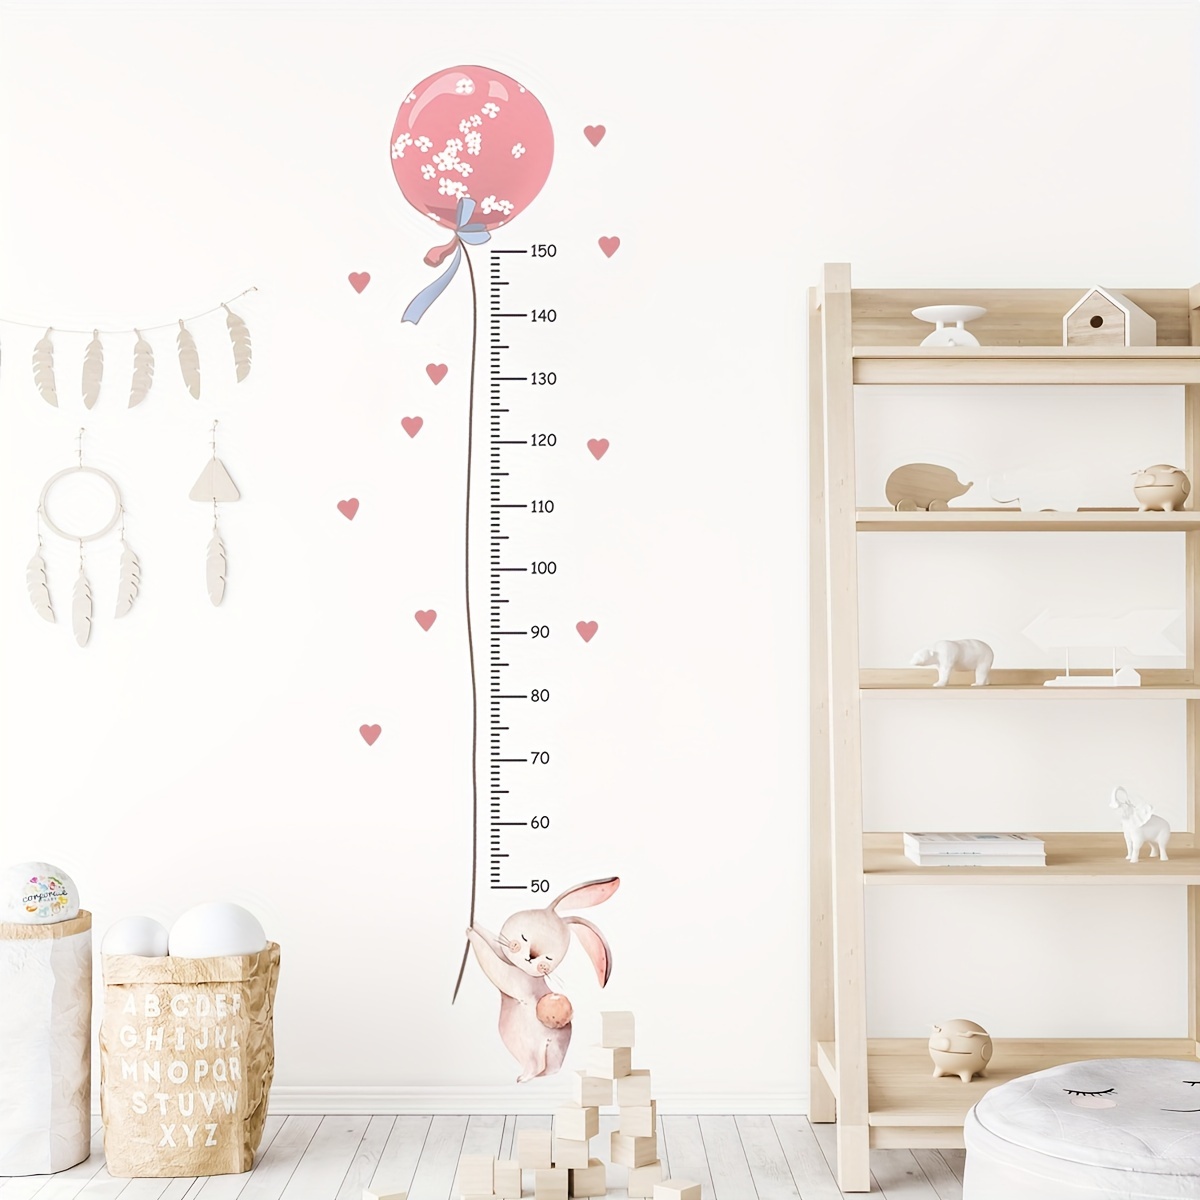 

Pvc Cartoon Rabbit & Pink Balloon Growth Chart Wall Stickers - 2 Pack Height Measuring Ruler Decals For Kids Bedroom Nursery Decor